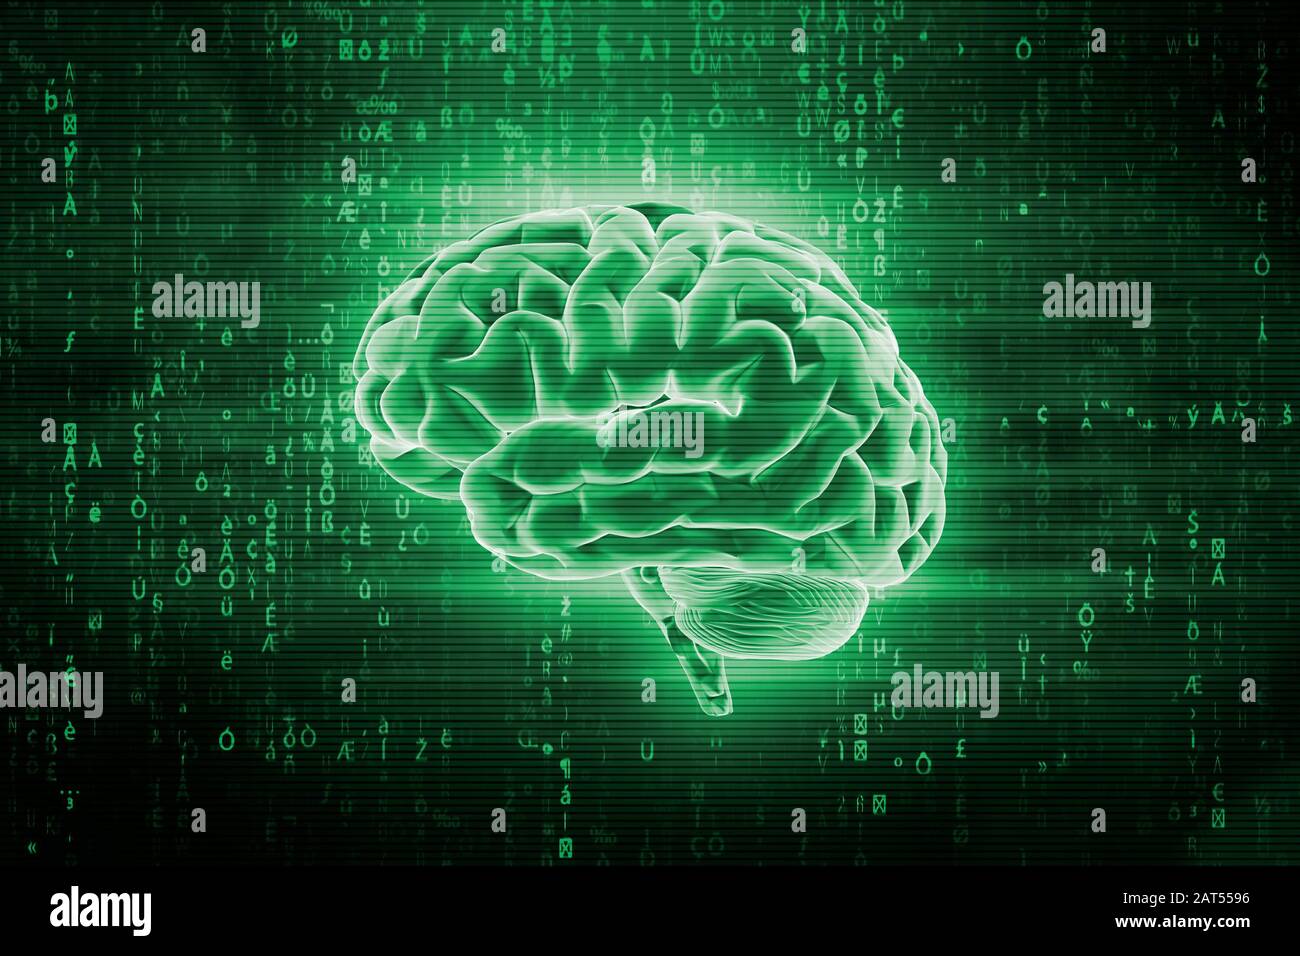 Human brain and computer or it code. Artificial intelligence or AI 3d rendering illustration. Stock Photo